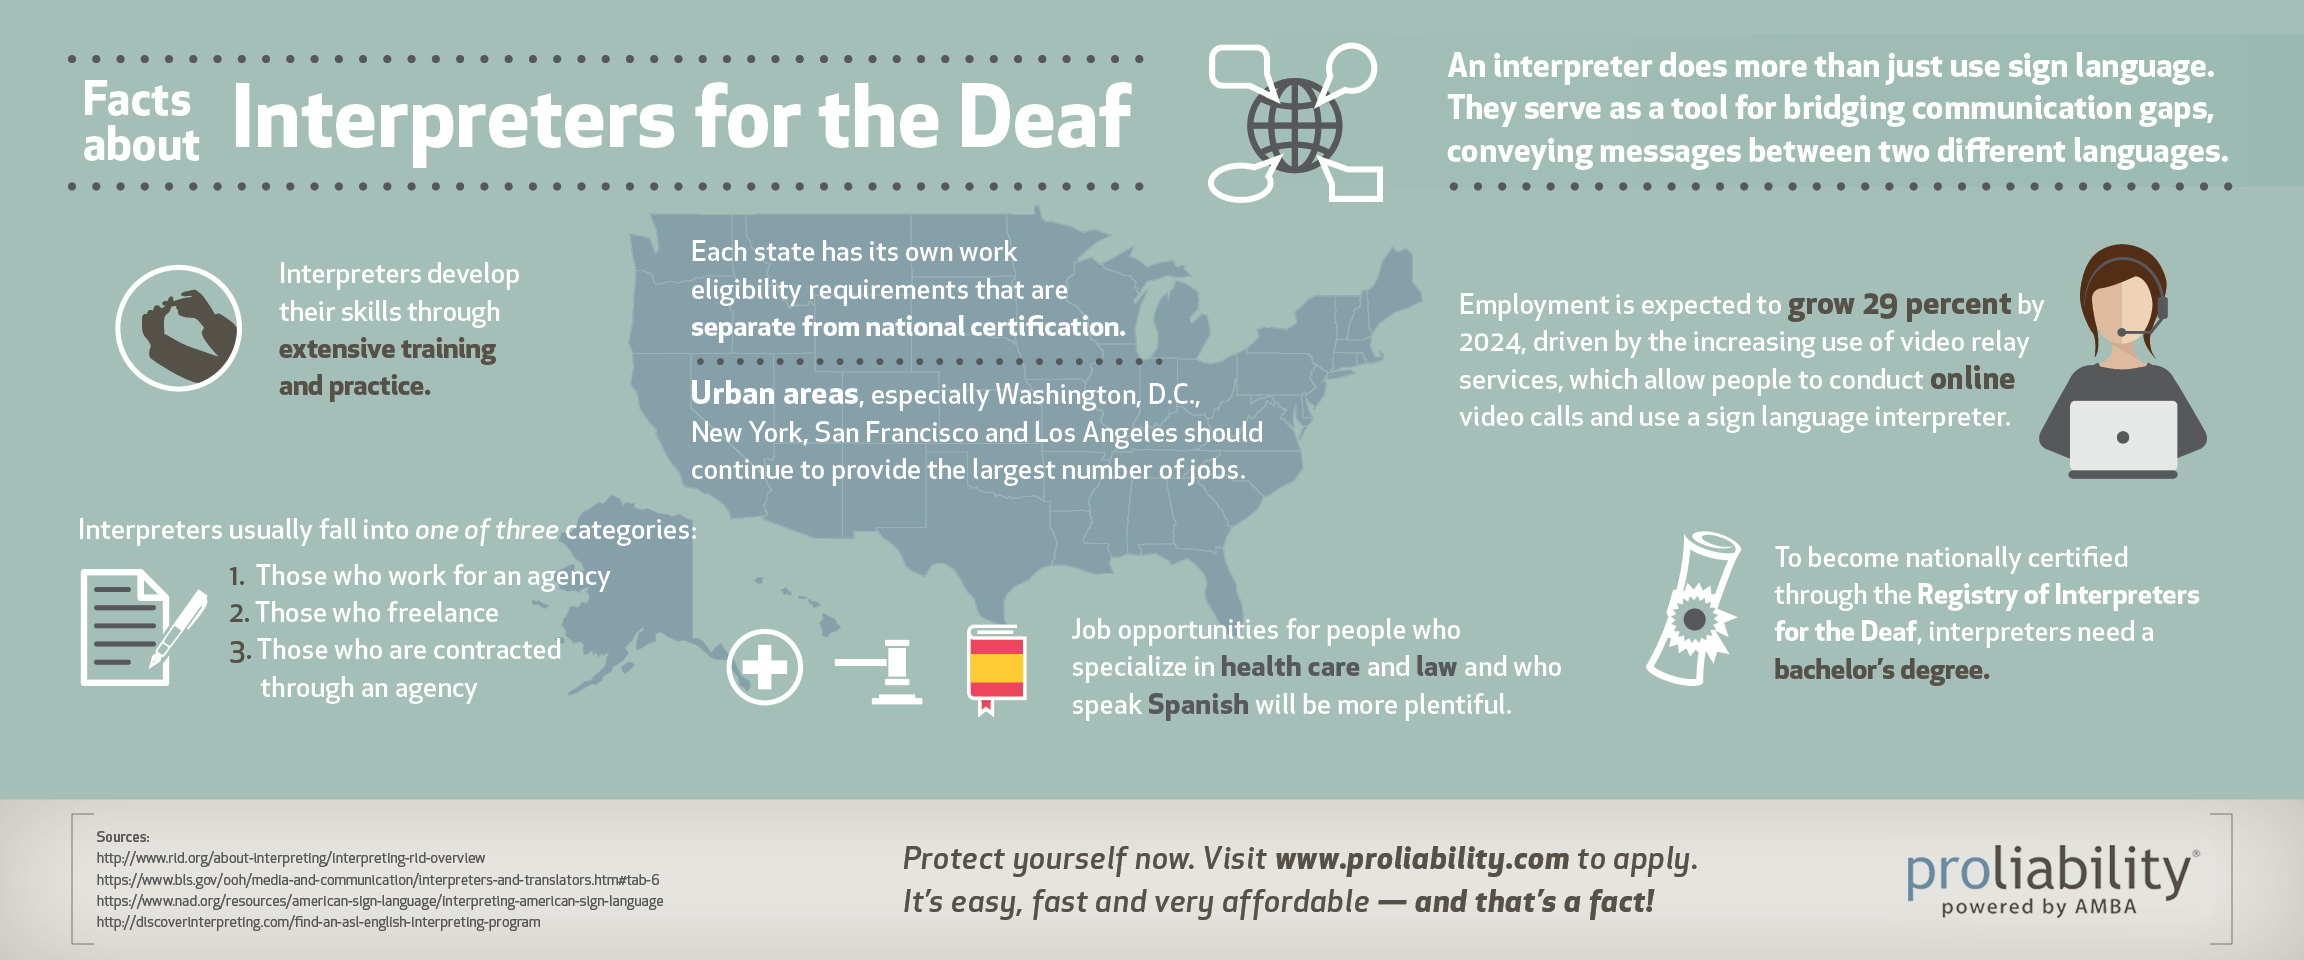 facts about deaf interpreters